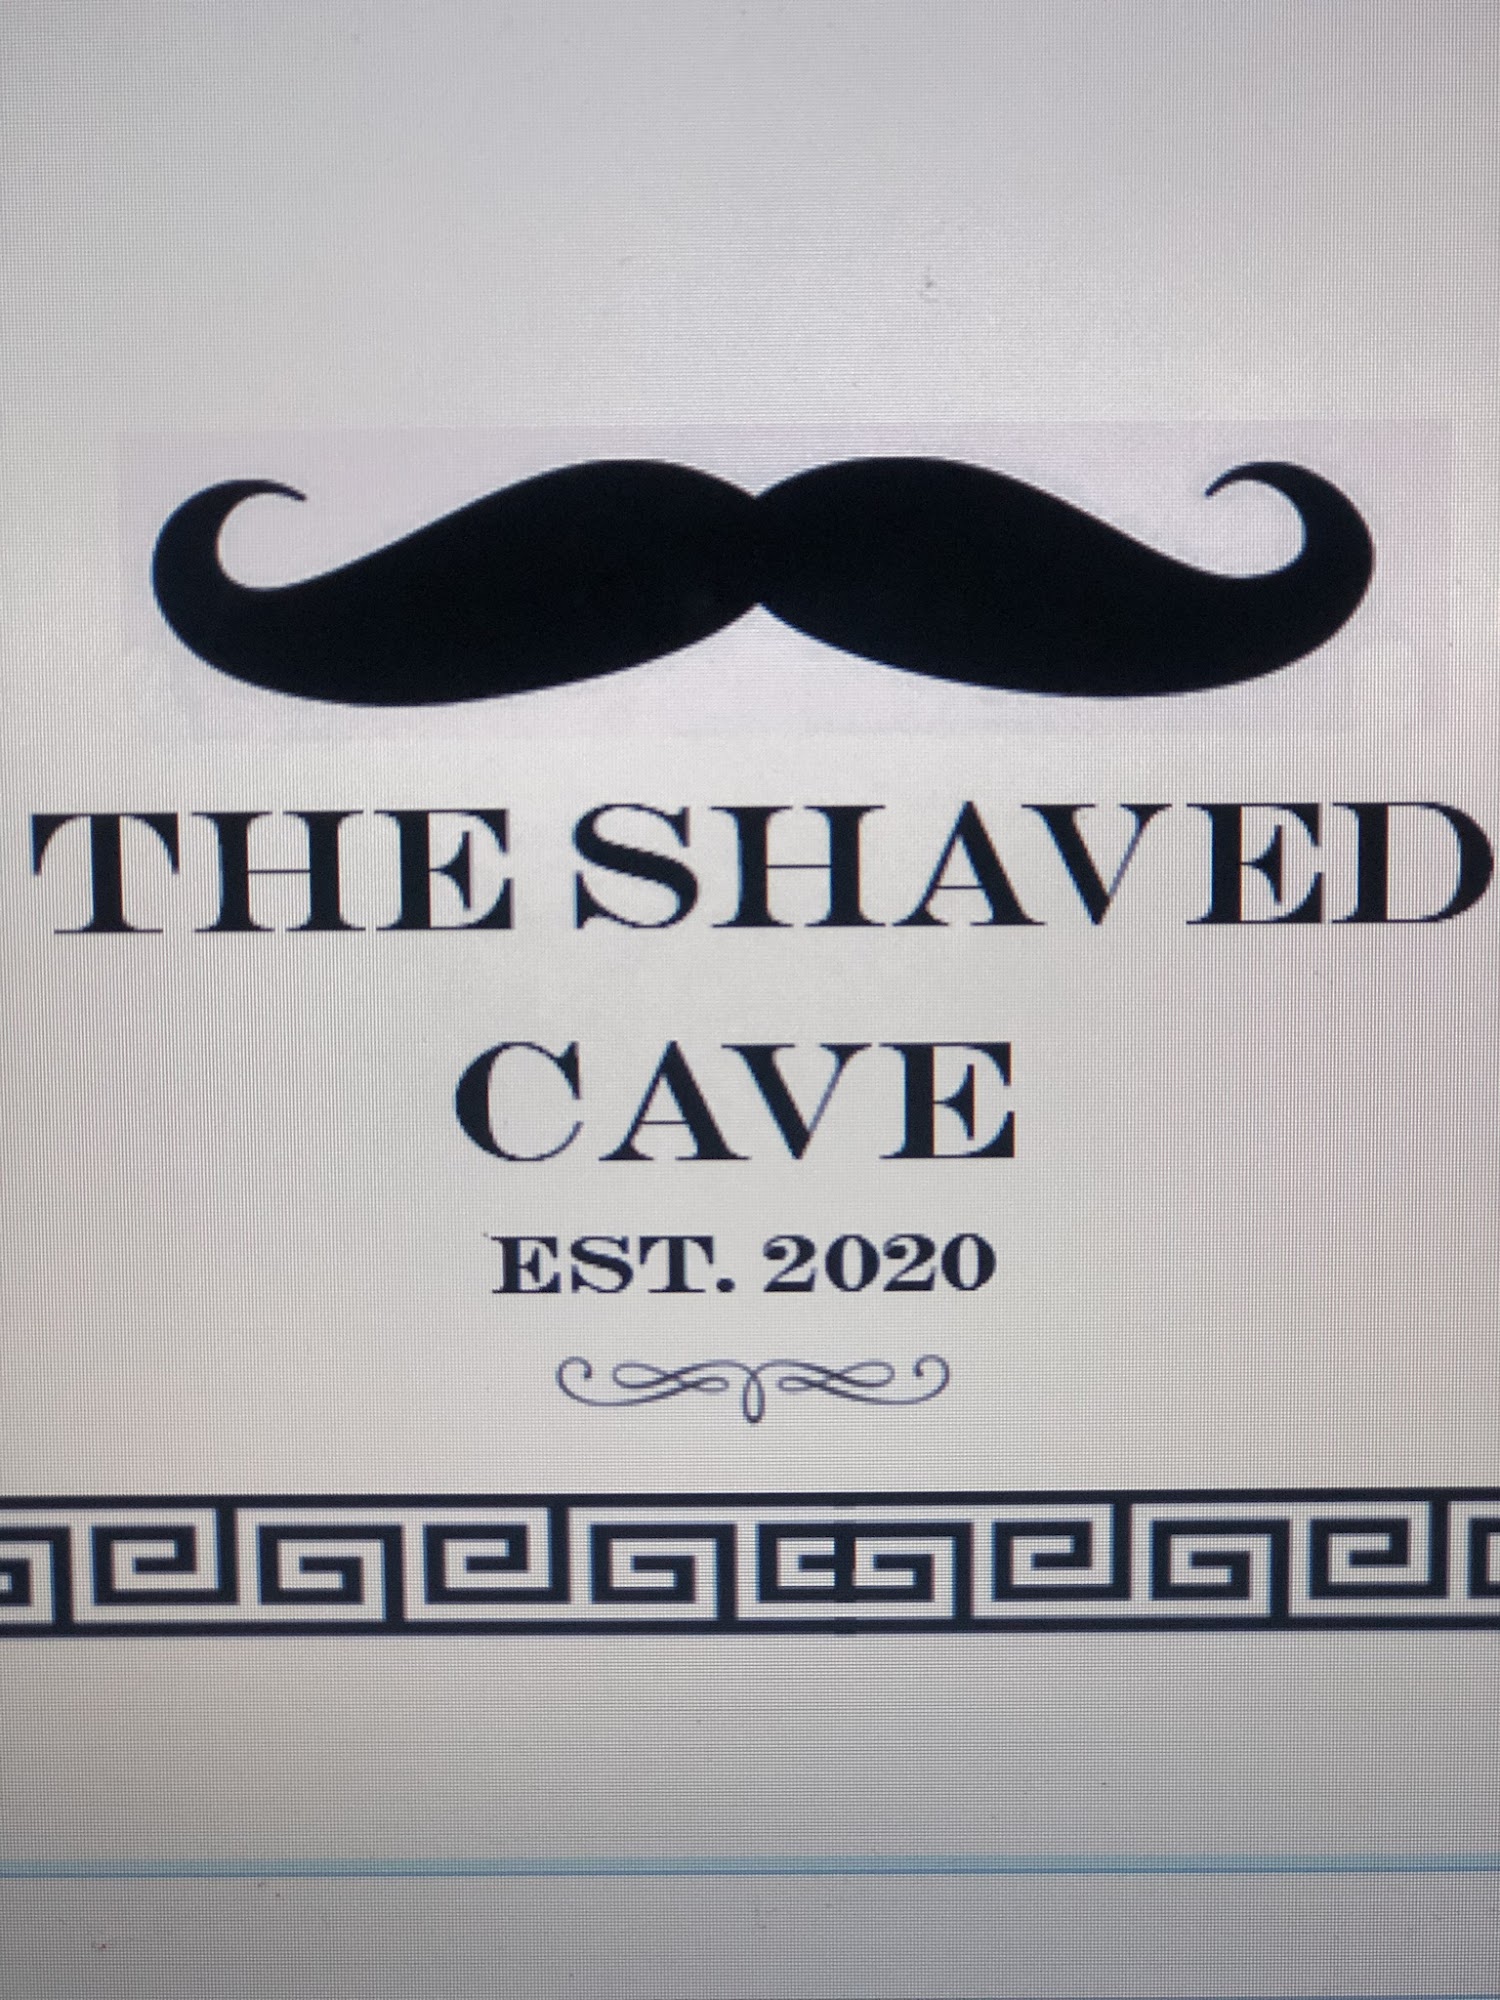 The Shaved Cave LLC